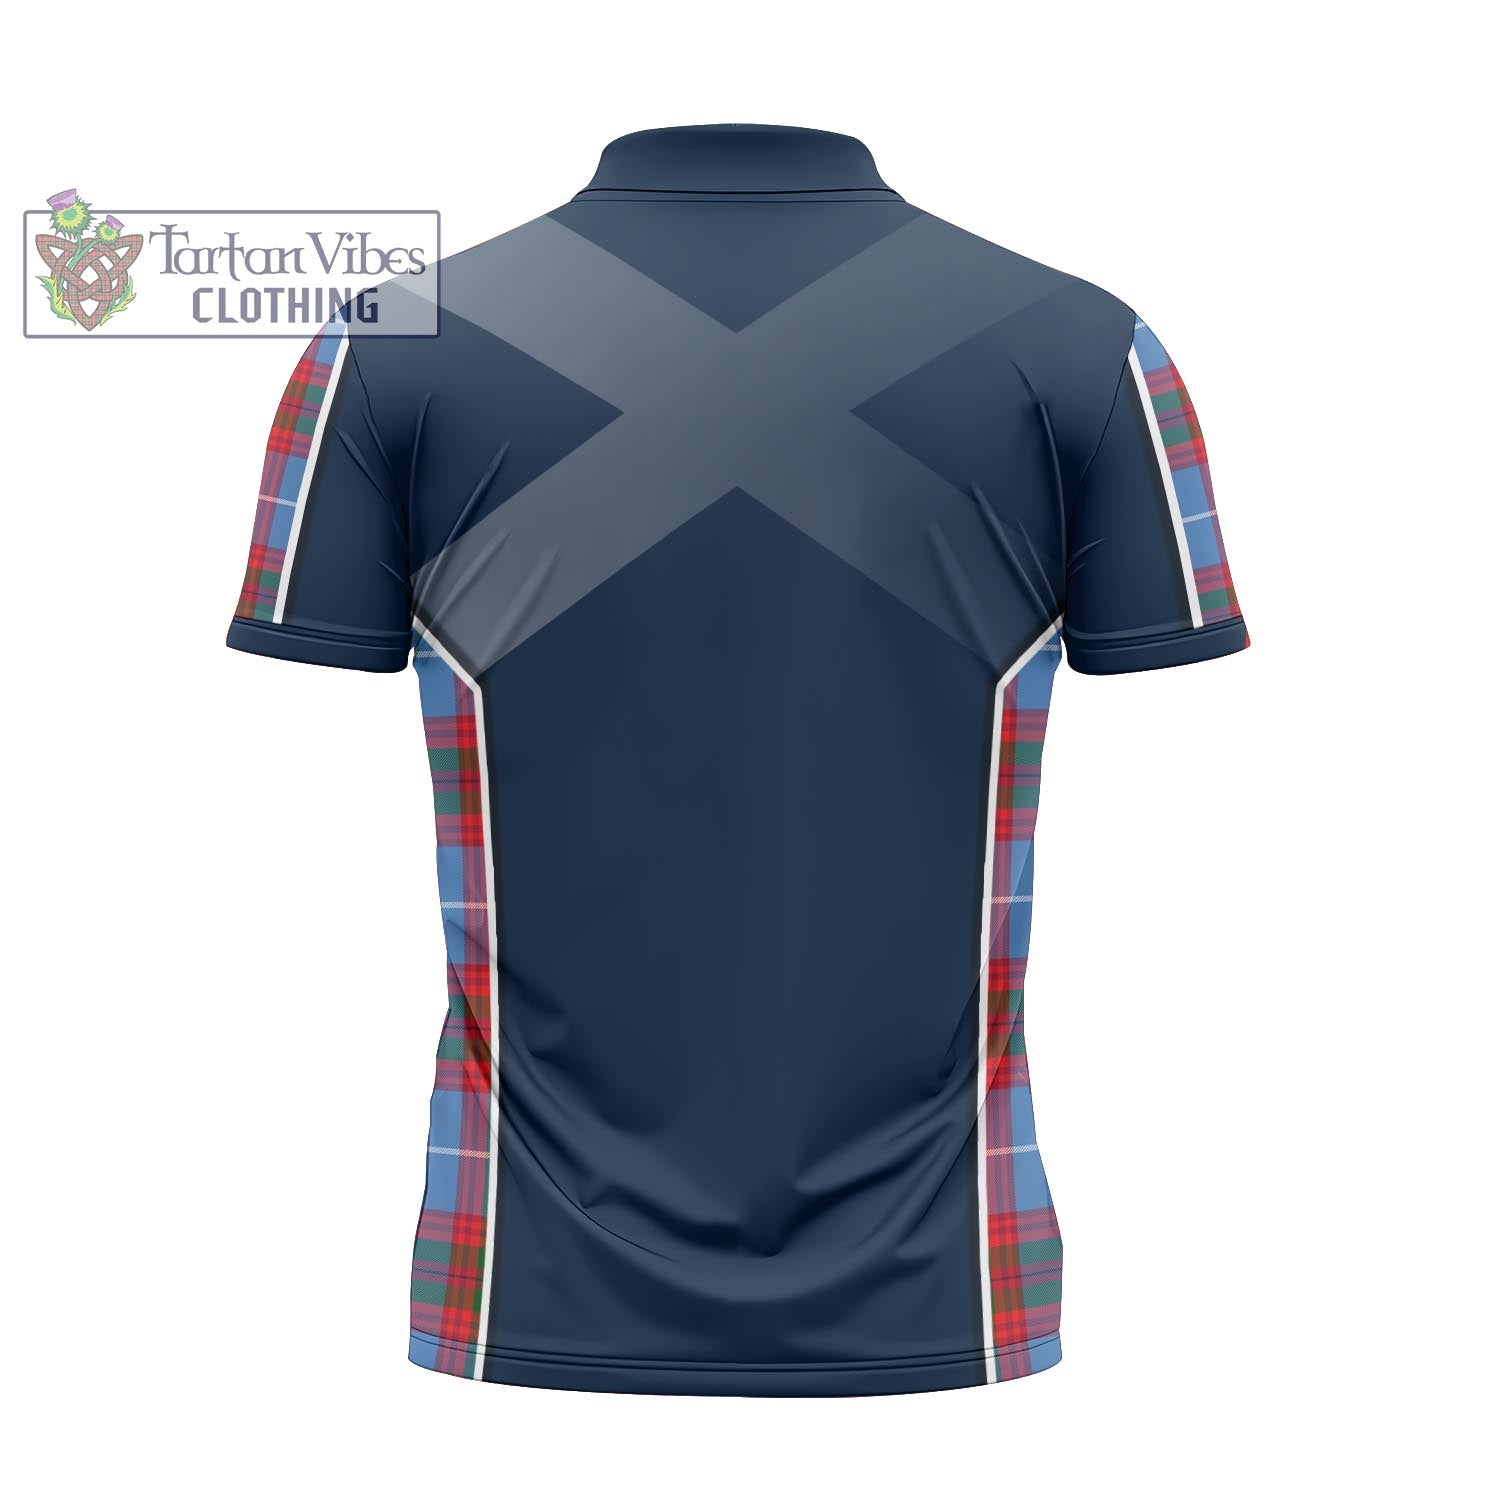 Tartan Vibes Clothing Dalmahoy Tartan Zipper Polo Shirt with Family Crest and Scottish Thistle Vibes Sport Style